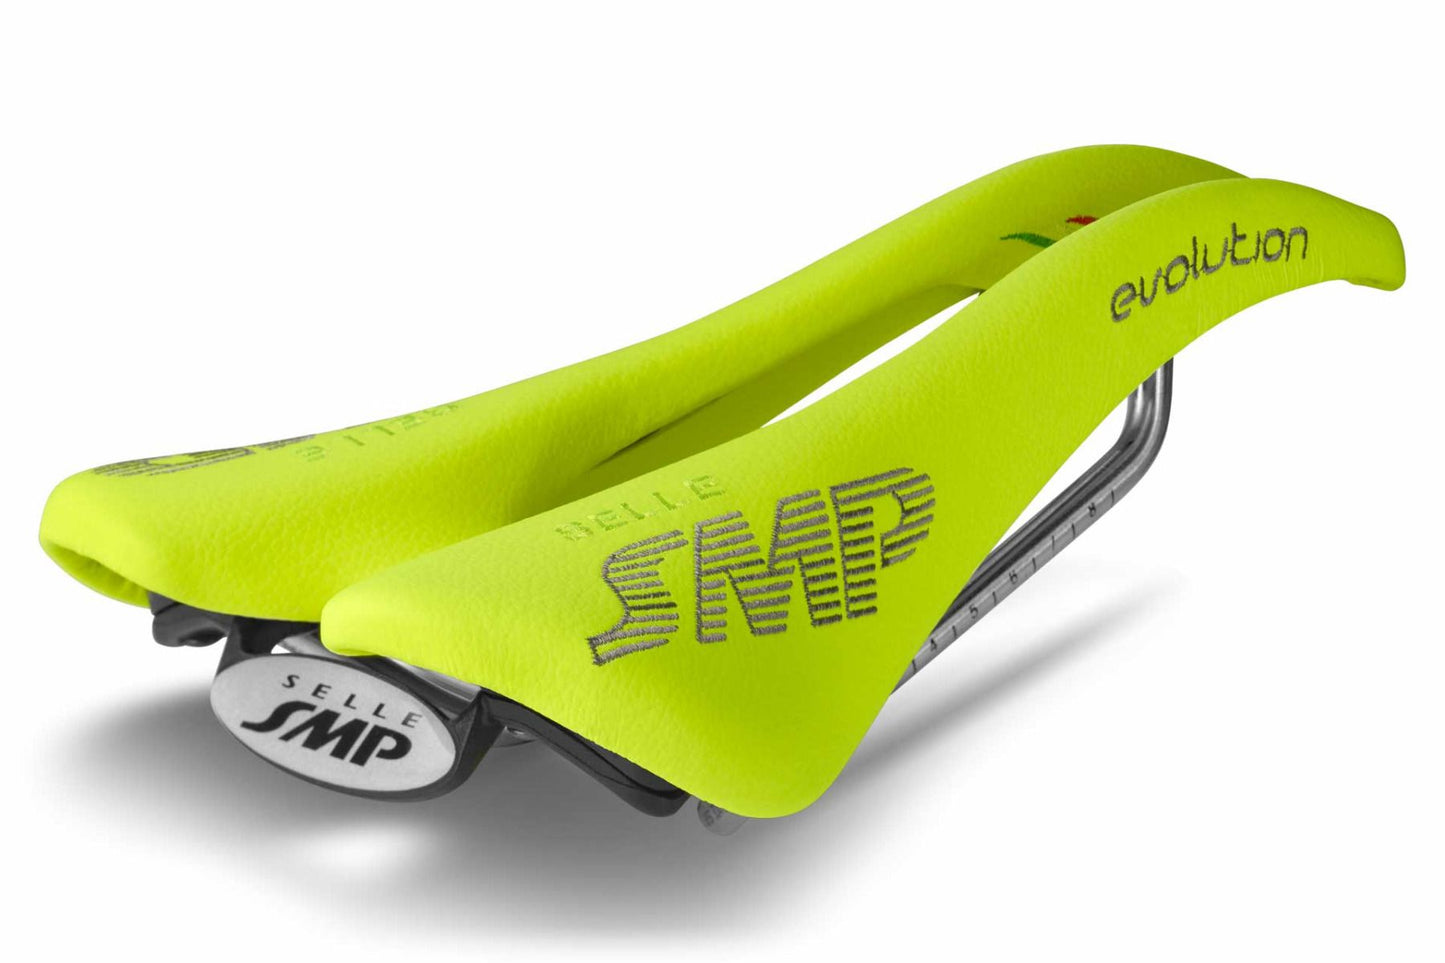 Selle SMP Evolution Saddle with Steel Rails (Fluro Yellow)